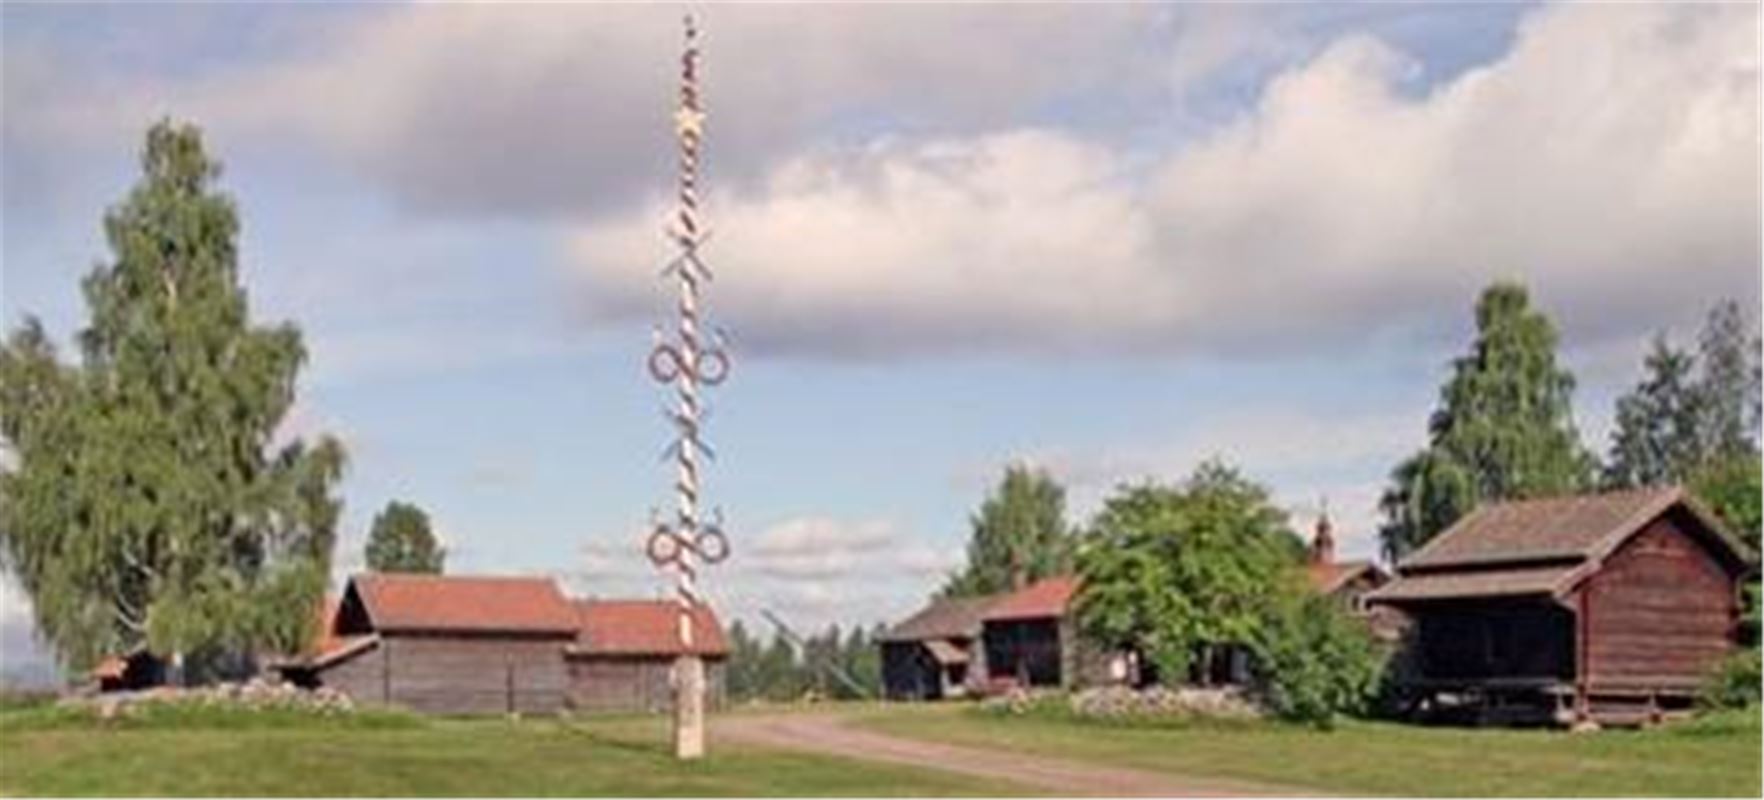 May-pole at open air museum.